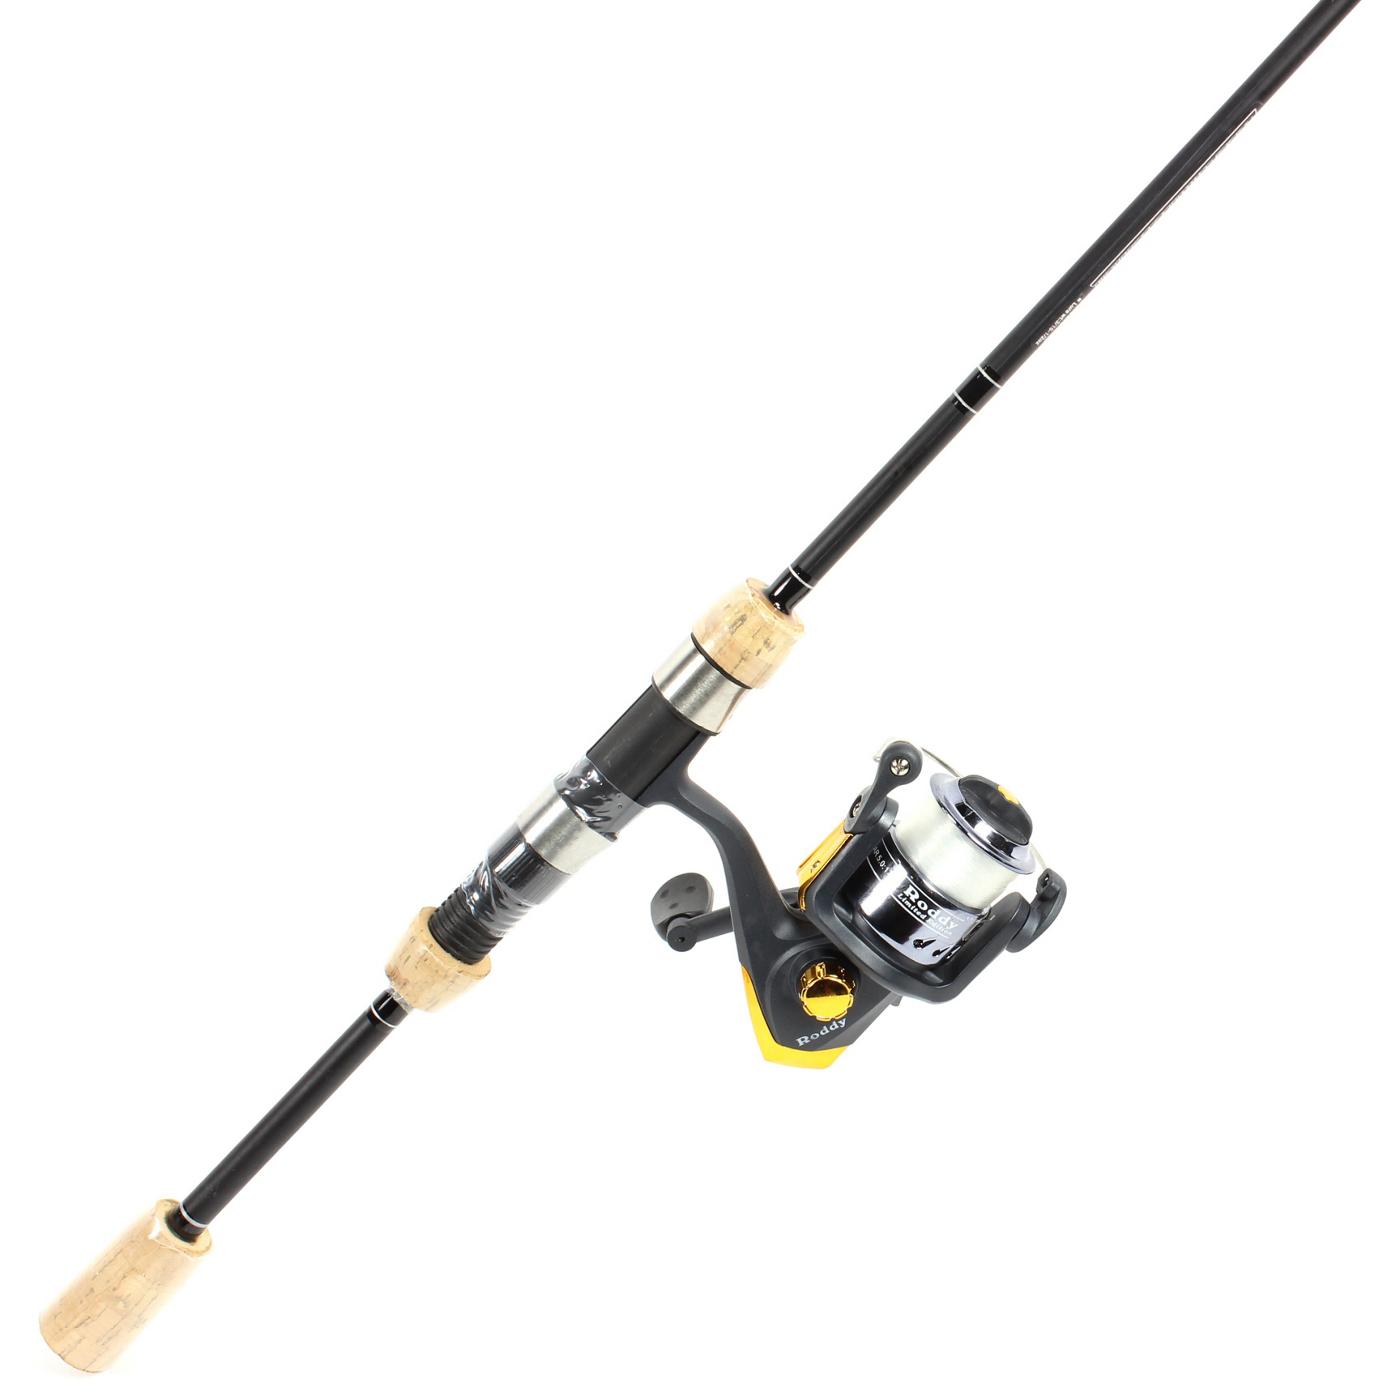 Master 6' Roddy Limited Edition Spinning Combo Rod - Shop Fishing